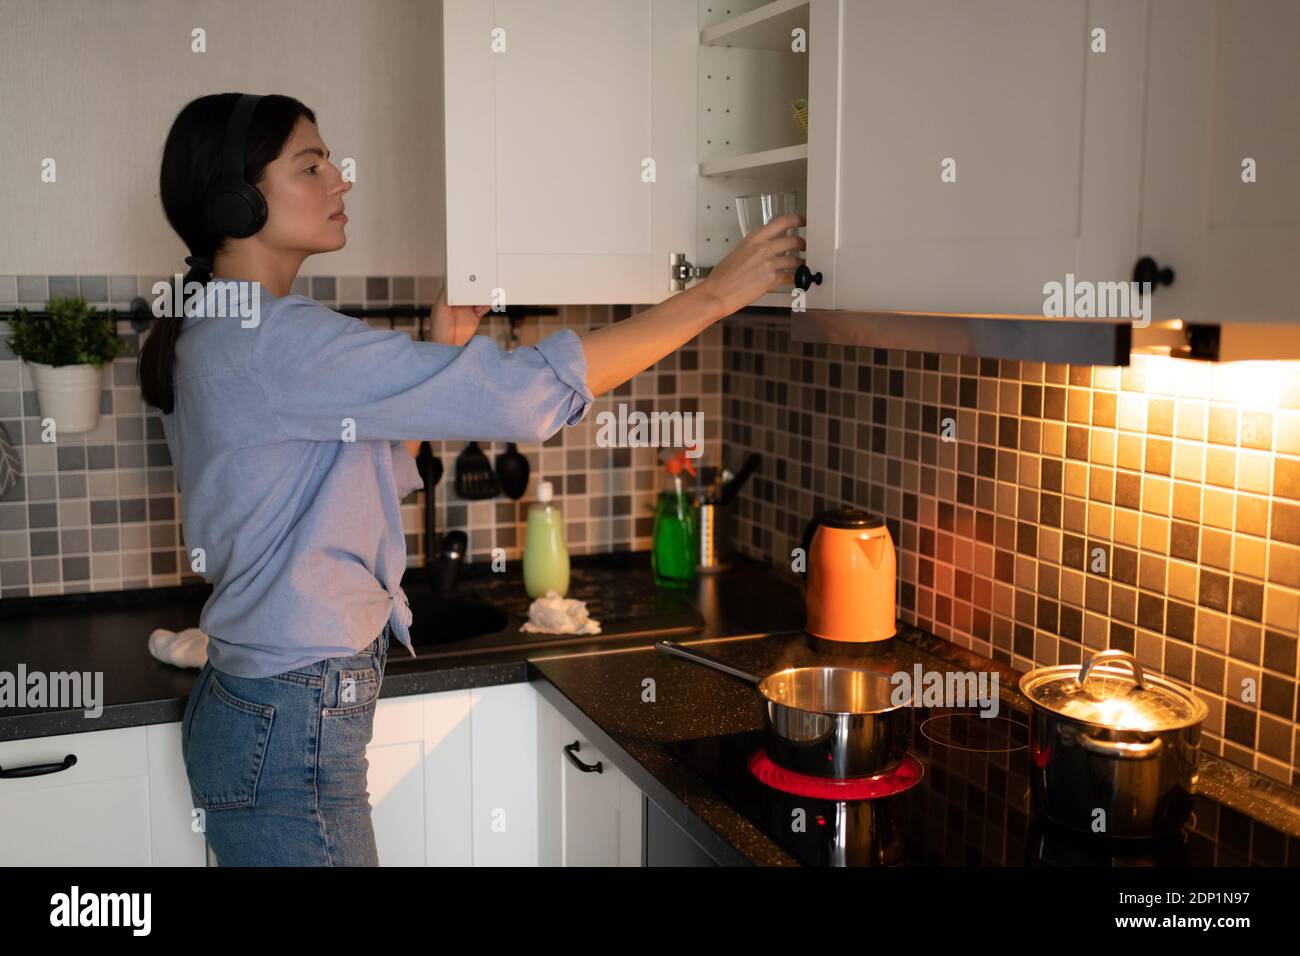 Side view of casual female in headphones putting clean glass in cupboard while cleaning kitchen at home and listening to music Stock Photo